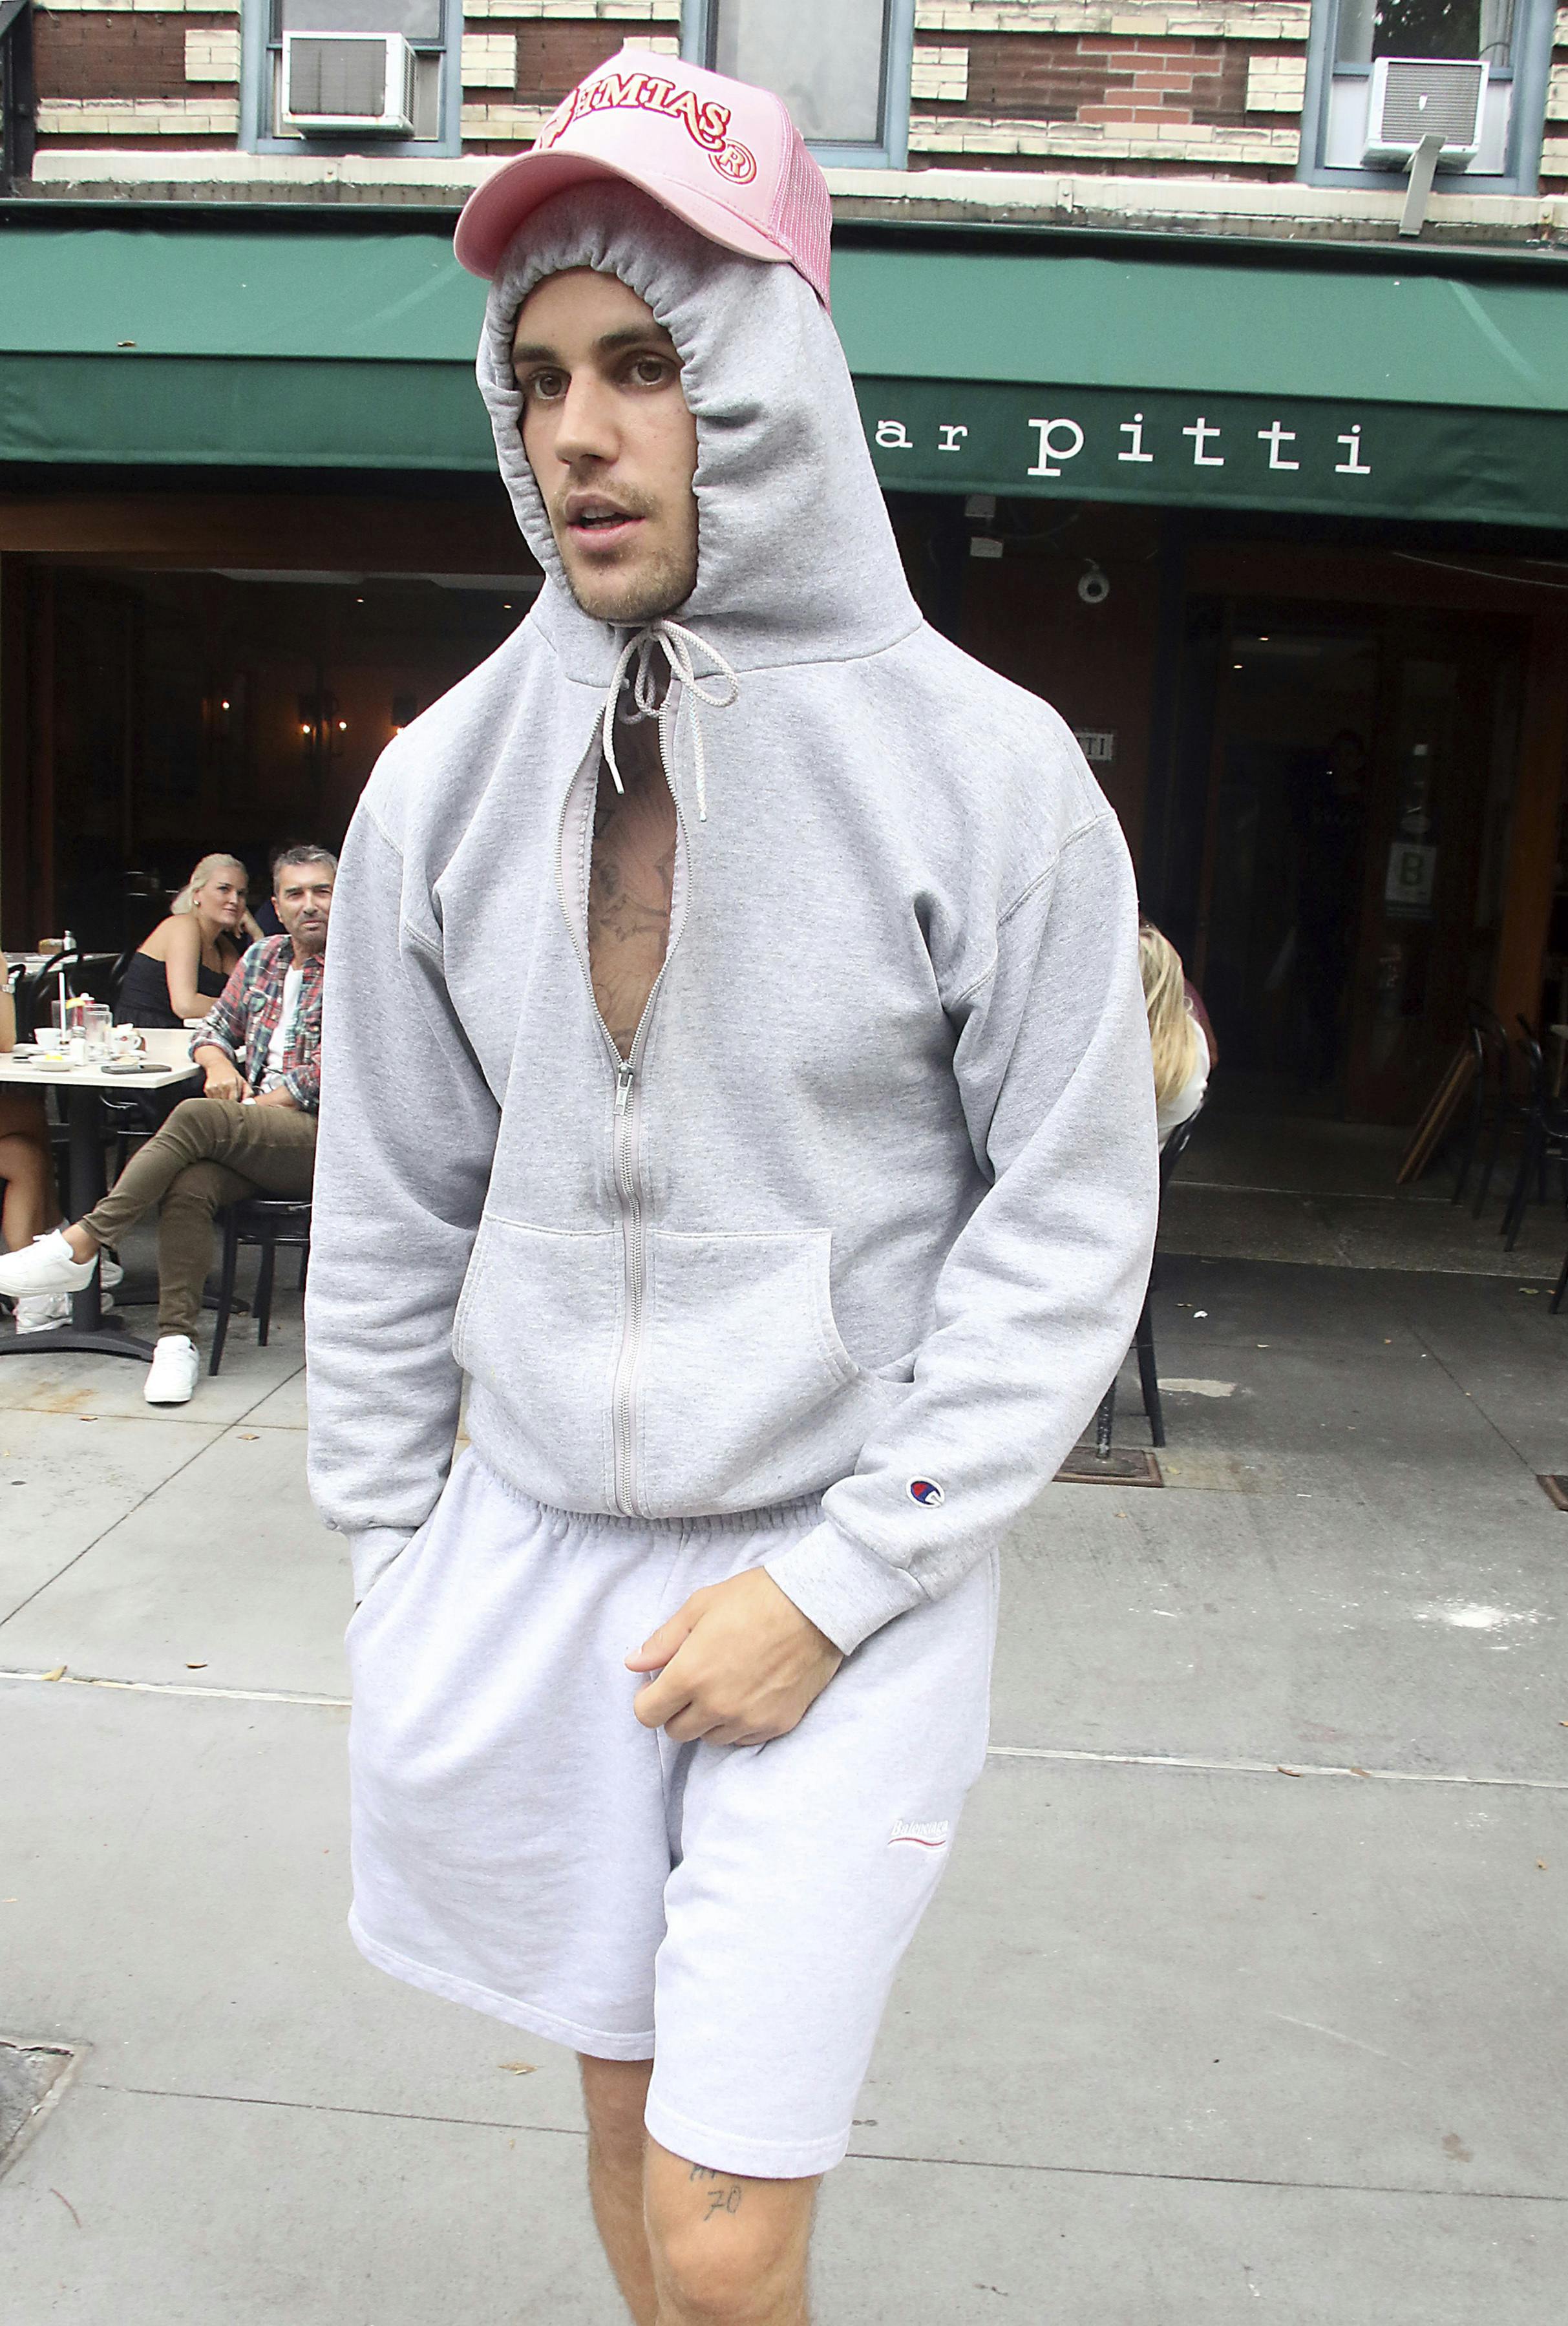 NEW YORK, NY- AUGUST 28: Justin Bieber seen having lunch at Bar Pitti in New York City on August 28, 2023. Credit: RW/MediaPunch /IPX